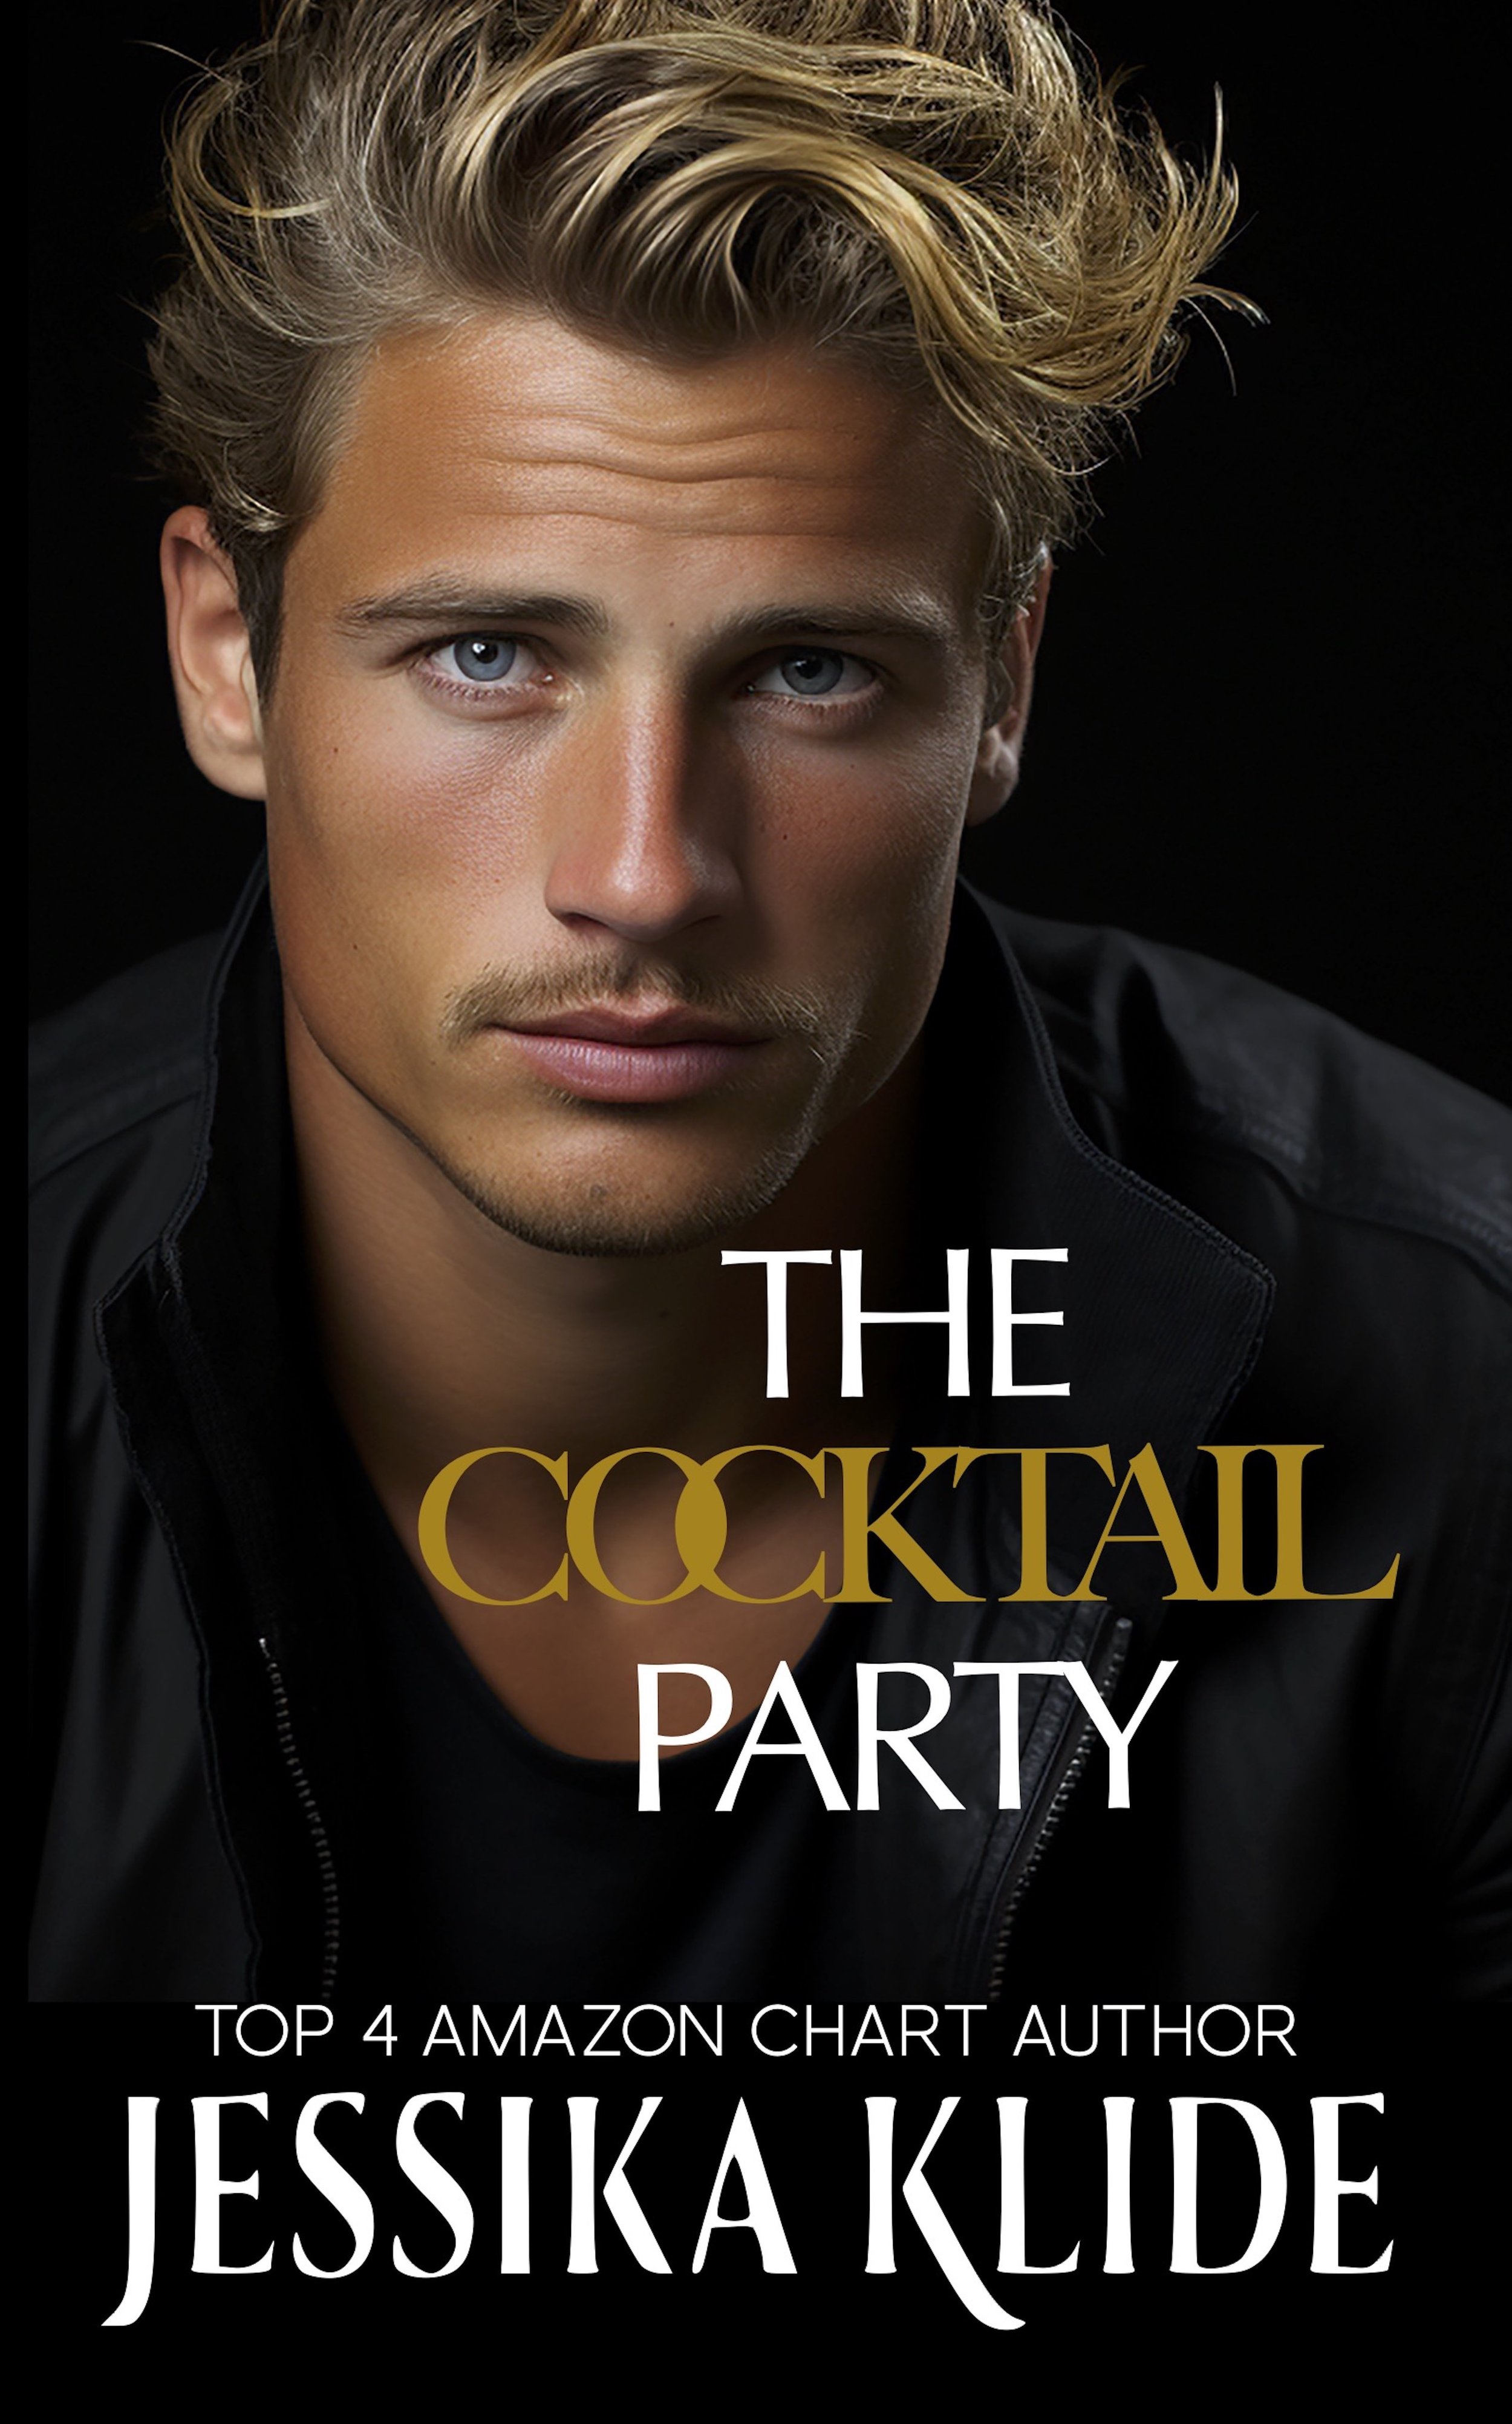 2 The Cocktail Party ebook.jpg